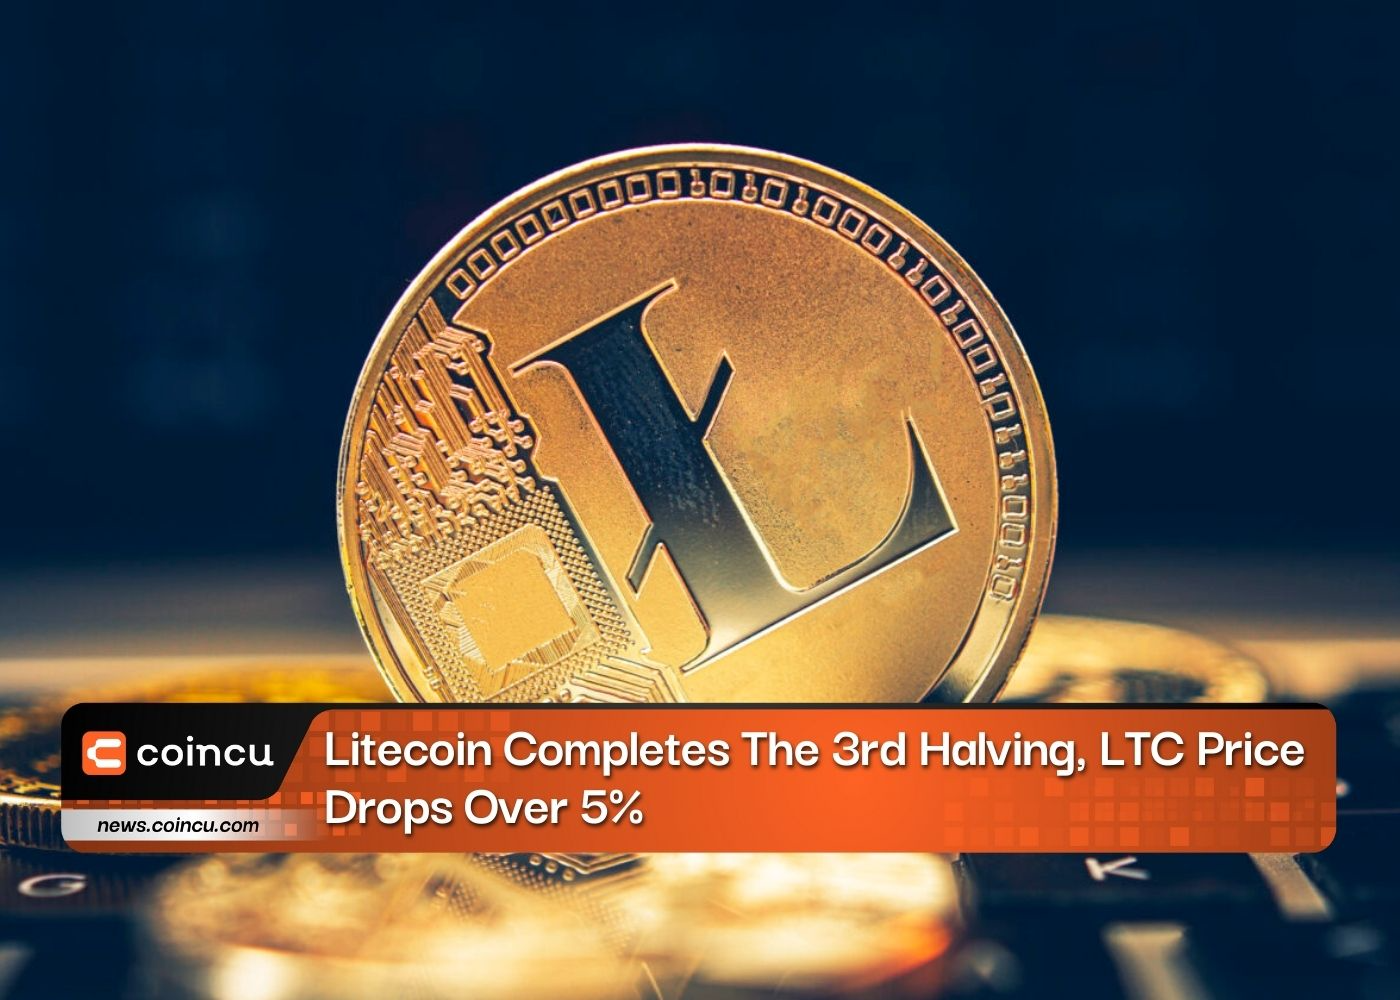 Litecoin Completes The 3rd Halving, LTC Price Drops Over 5%